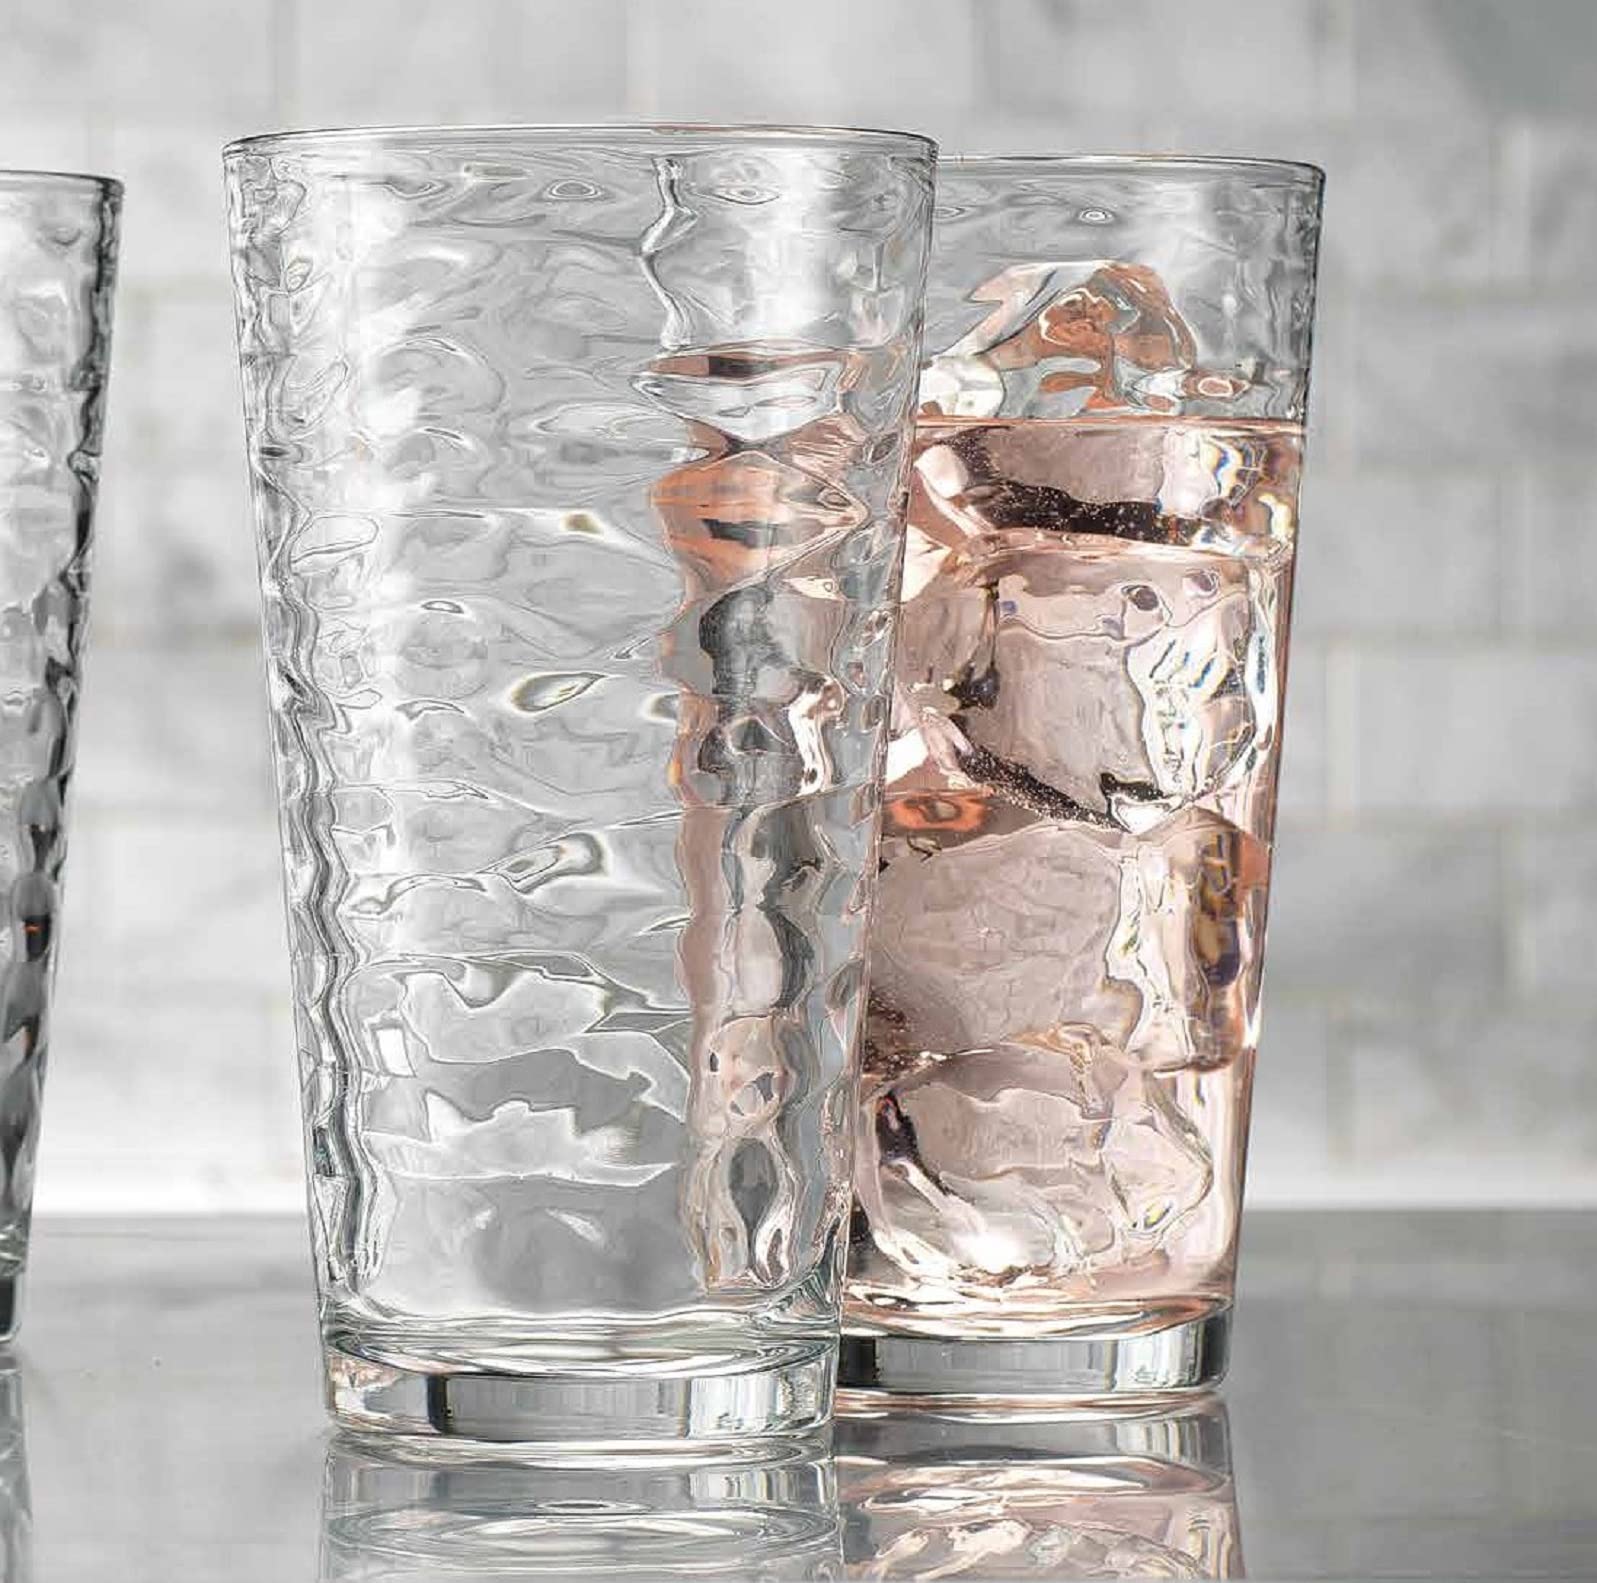 Glaver's Drinking Glasses Set of 10 Highball Glass Cups, Premium Glass Quality Coolers 17 Oz. Glassware. Ideal for Water, Juice, Cocktails, and Iced Tea. Dishwasher Safe.�  - Good